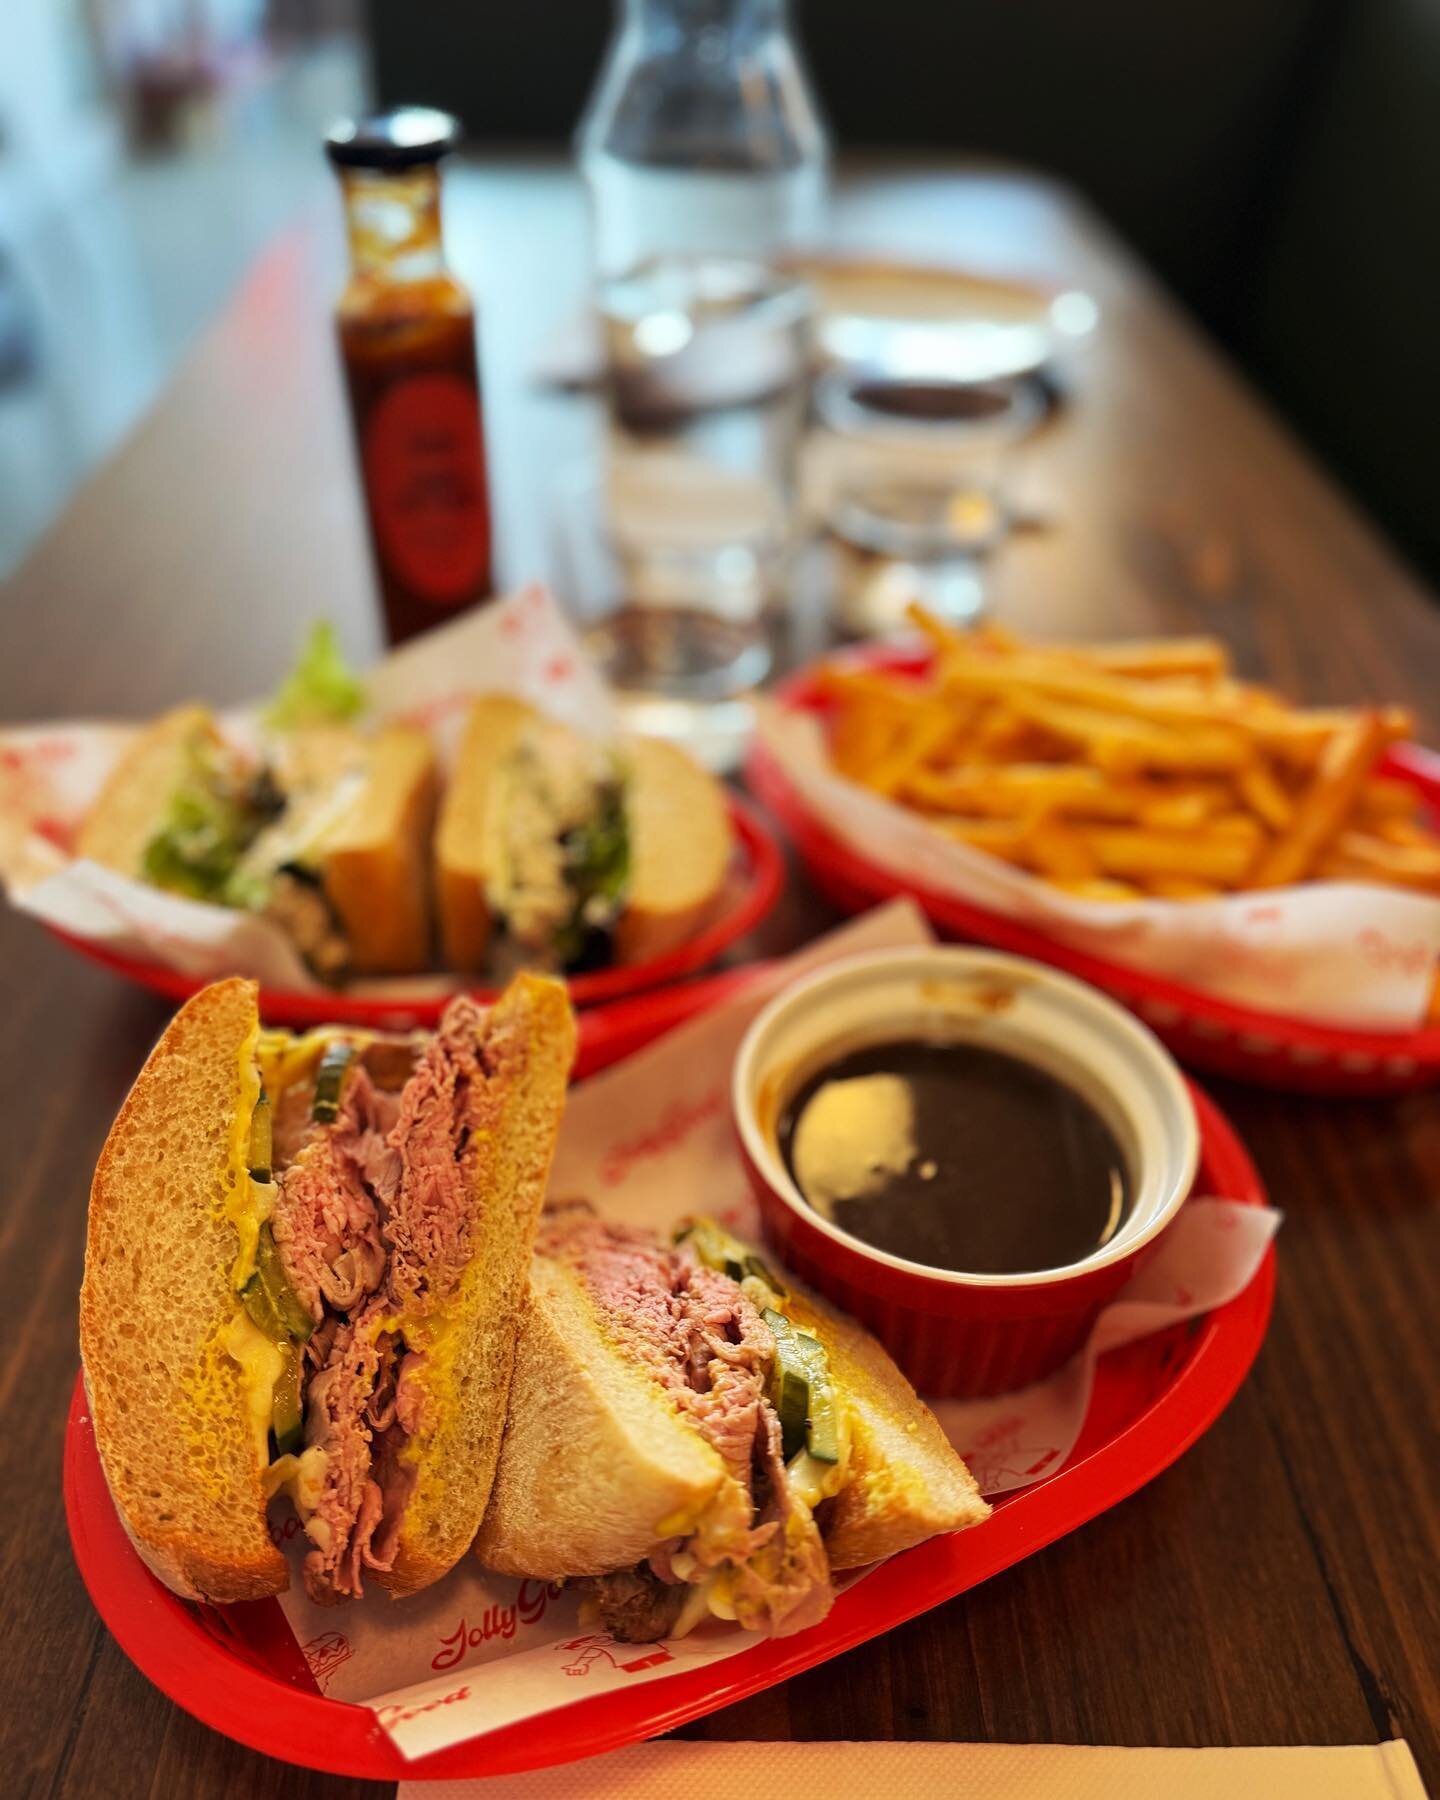 Thank you @jollygood_melbourne in Johnston Street Collingwood for the delicious lunch featuring Dench Ciabatta rolls. Simply delicious. Featured here French Dip and Chicken Sandwich both on Dench Ciabatta rolls. #ciabatta #denchbakers #jollygoodmelbo